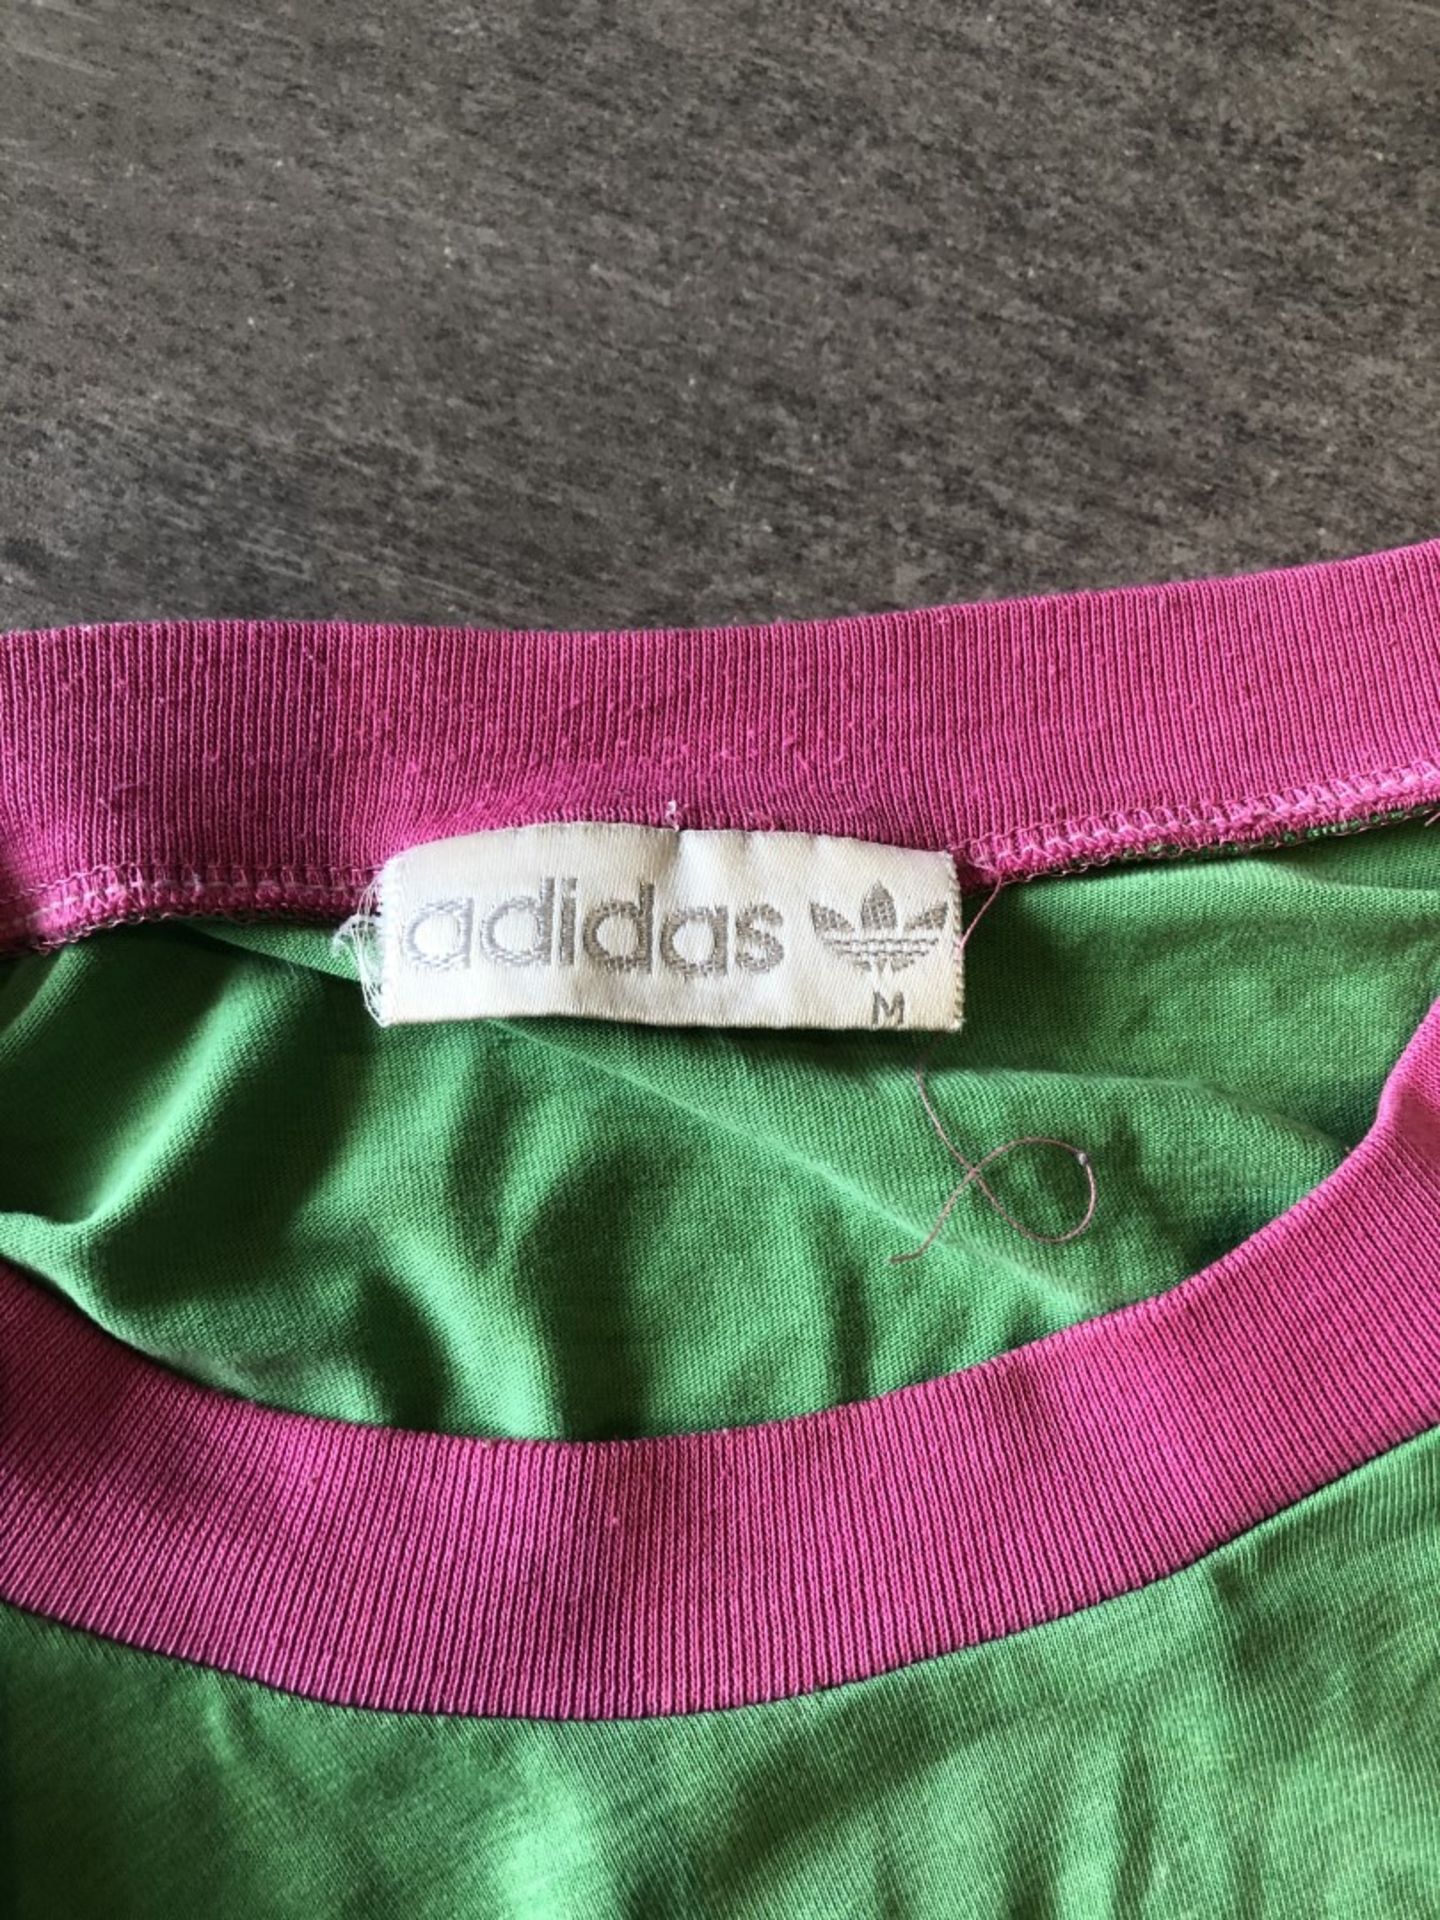 1 x Men's Genuine Adidas T-Shirt In Green - Size (EU/UK): M/M - Preowned - Ref: JS157 - NO VAT ON - Image 7 of 7